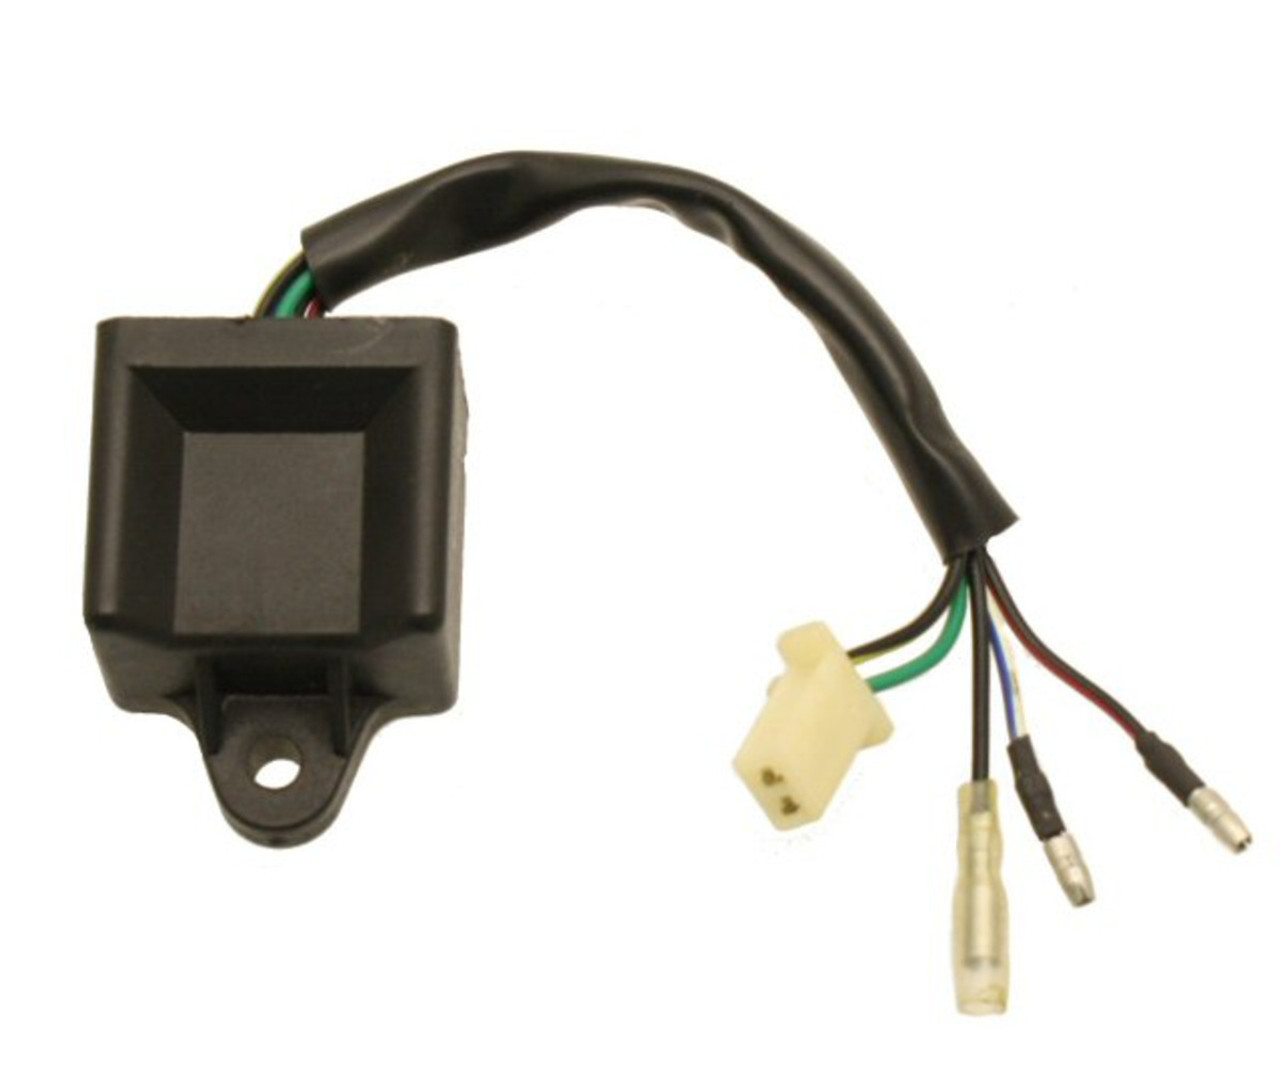 5 WIRE CDI FOR 50cc, 2-STROKE 40QMB, MINARELLI BASED ENGINES & SCOOTERS -  gy6racing